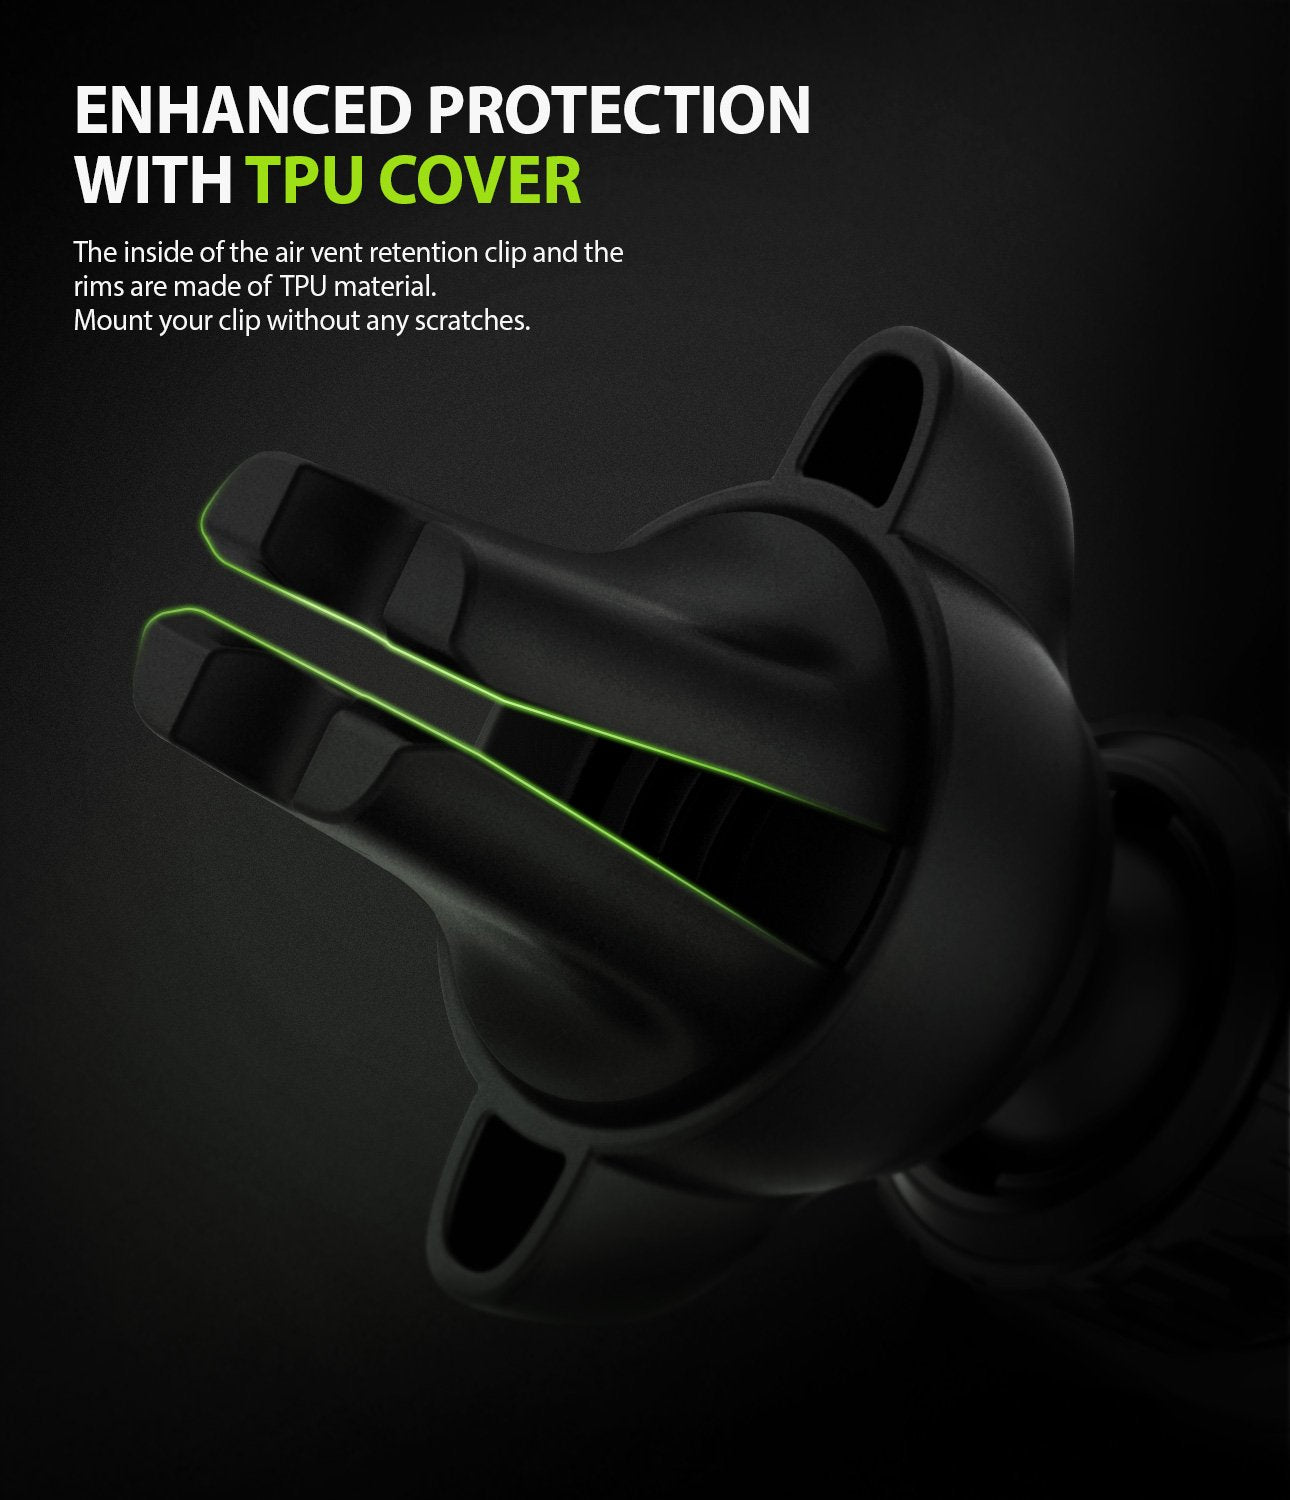 Ringke Power Clip Wing Car Mount enhanced protection with tpu cover to minimized the damage of the air vent